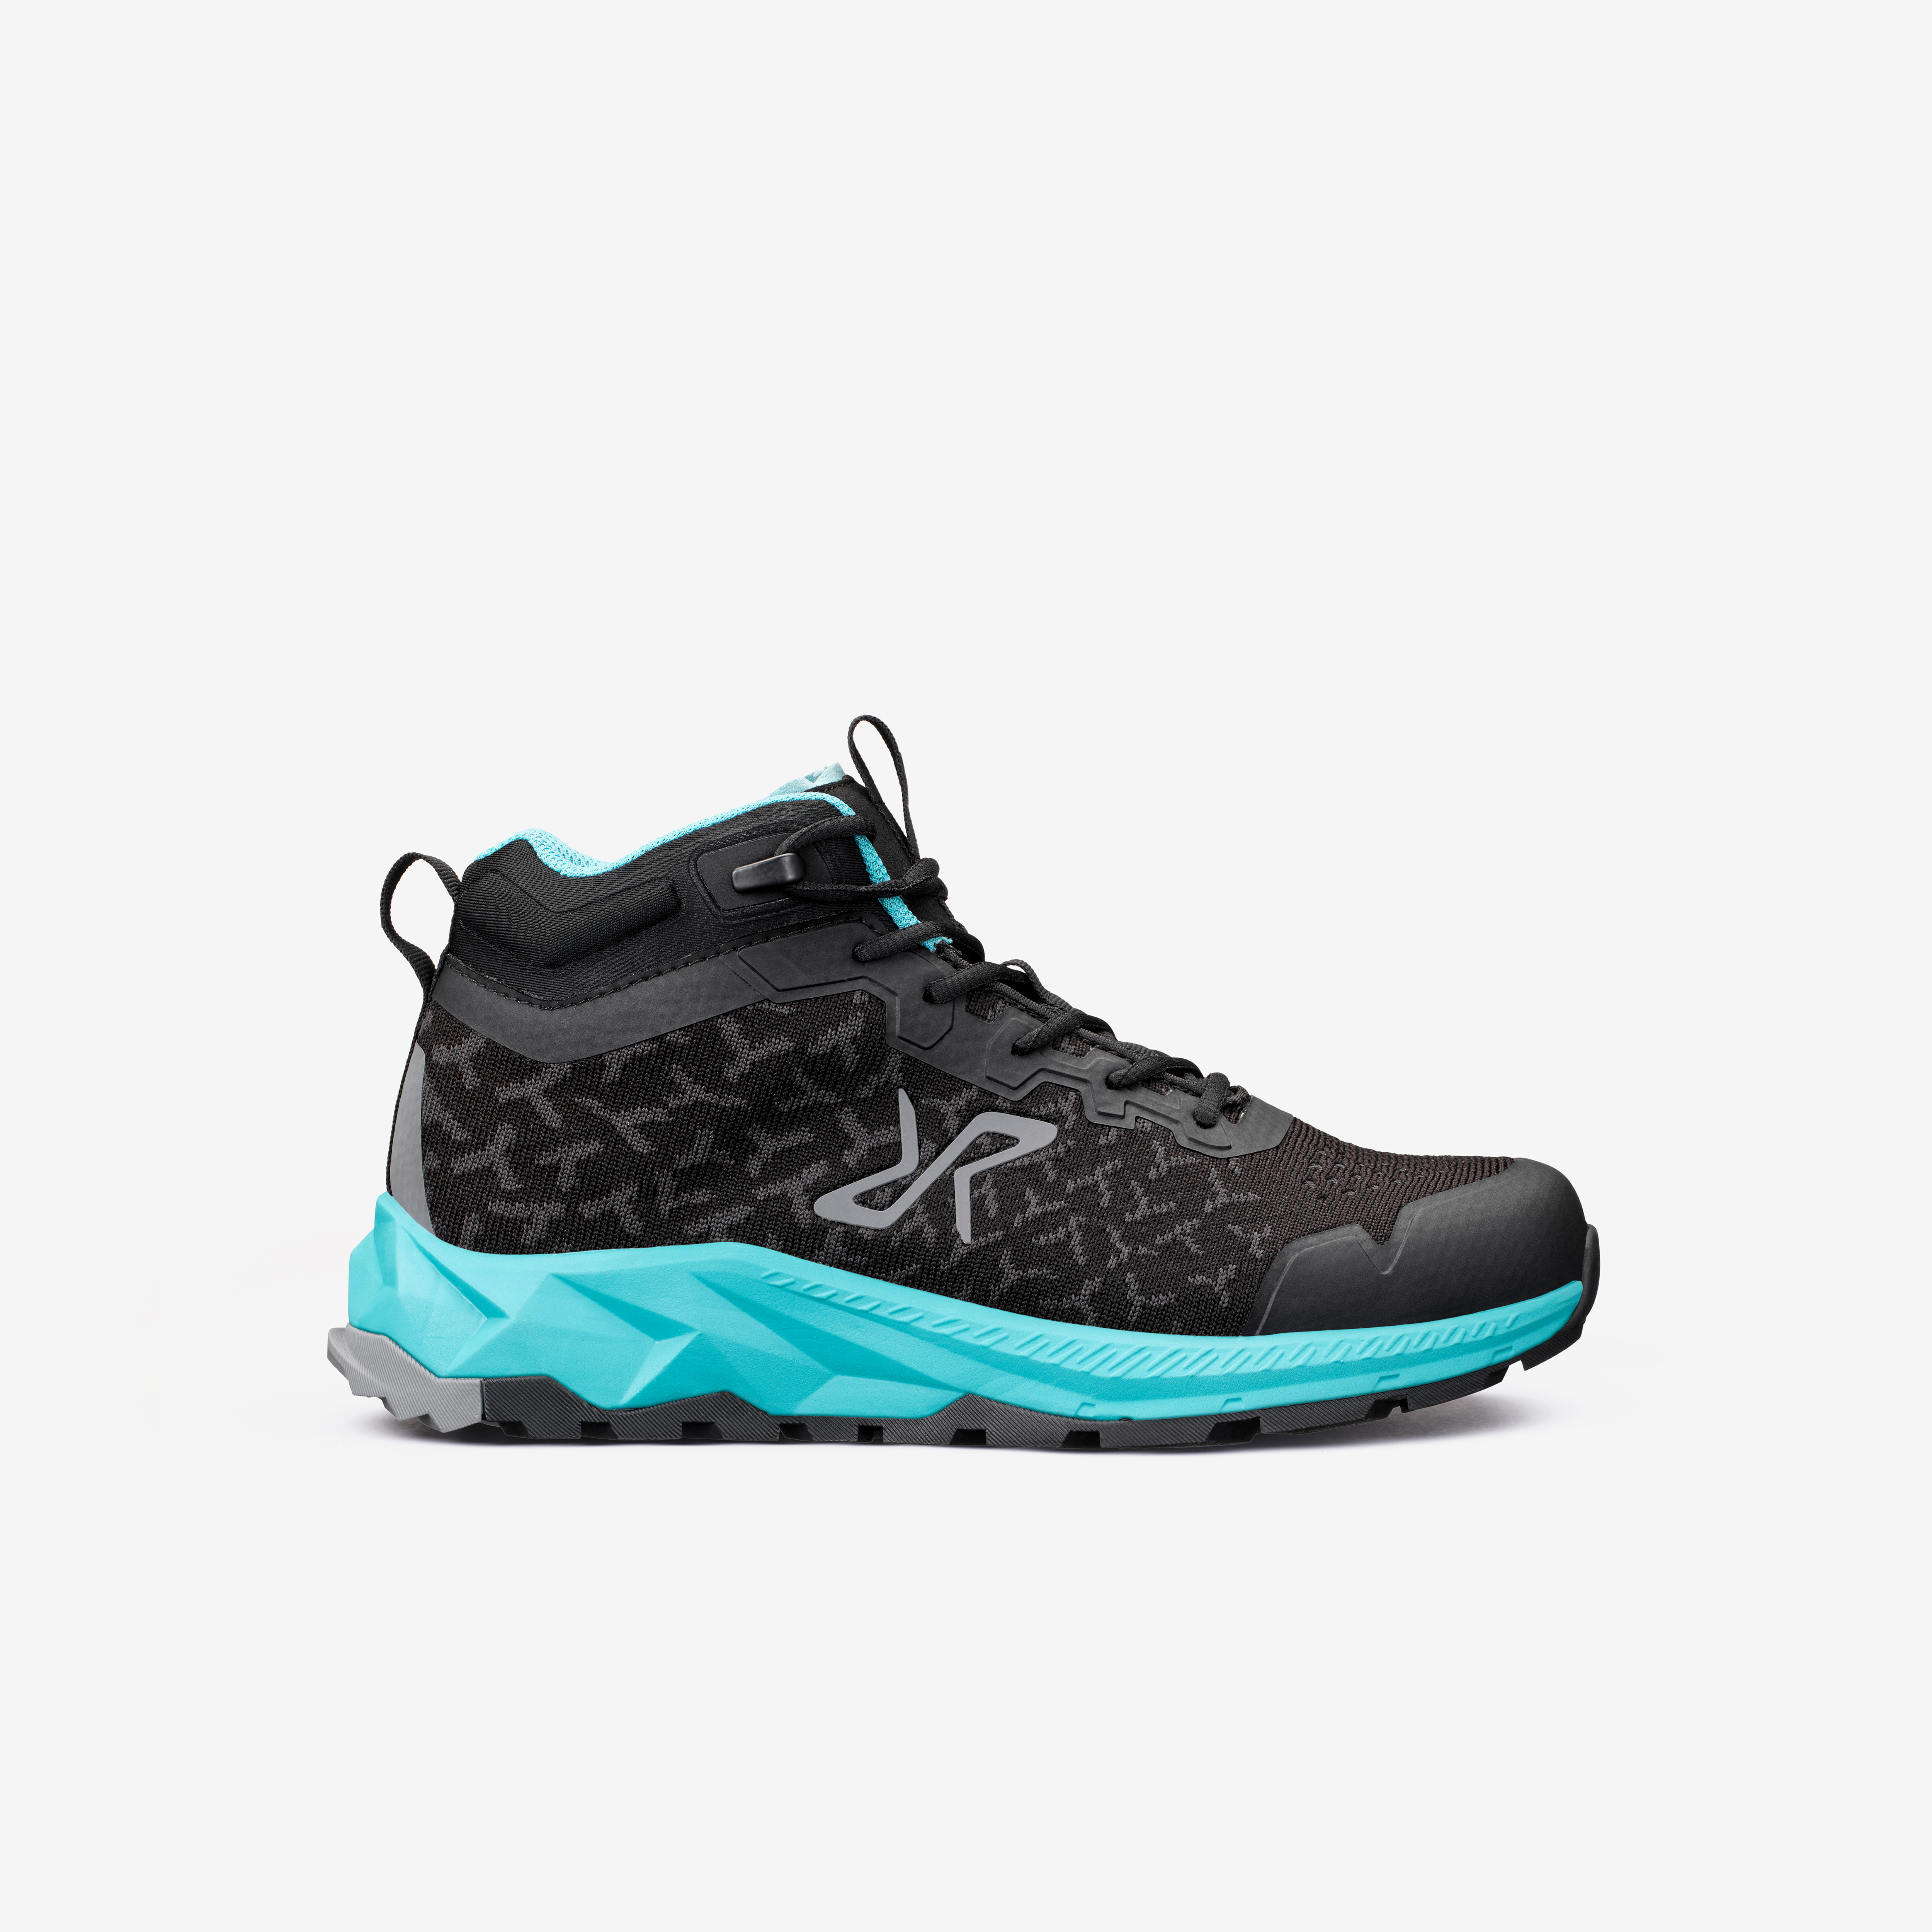 Trailknit Waterproof Mid Hiking Shoes Black/Turquoise Dame